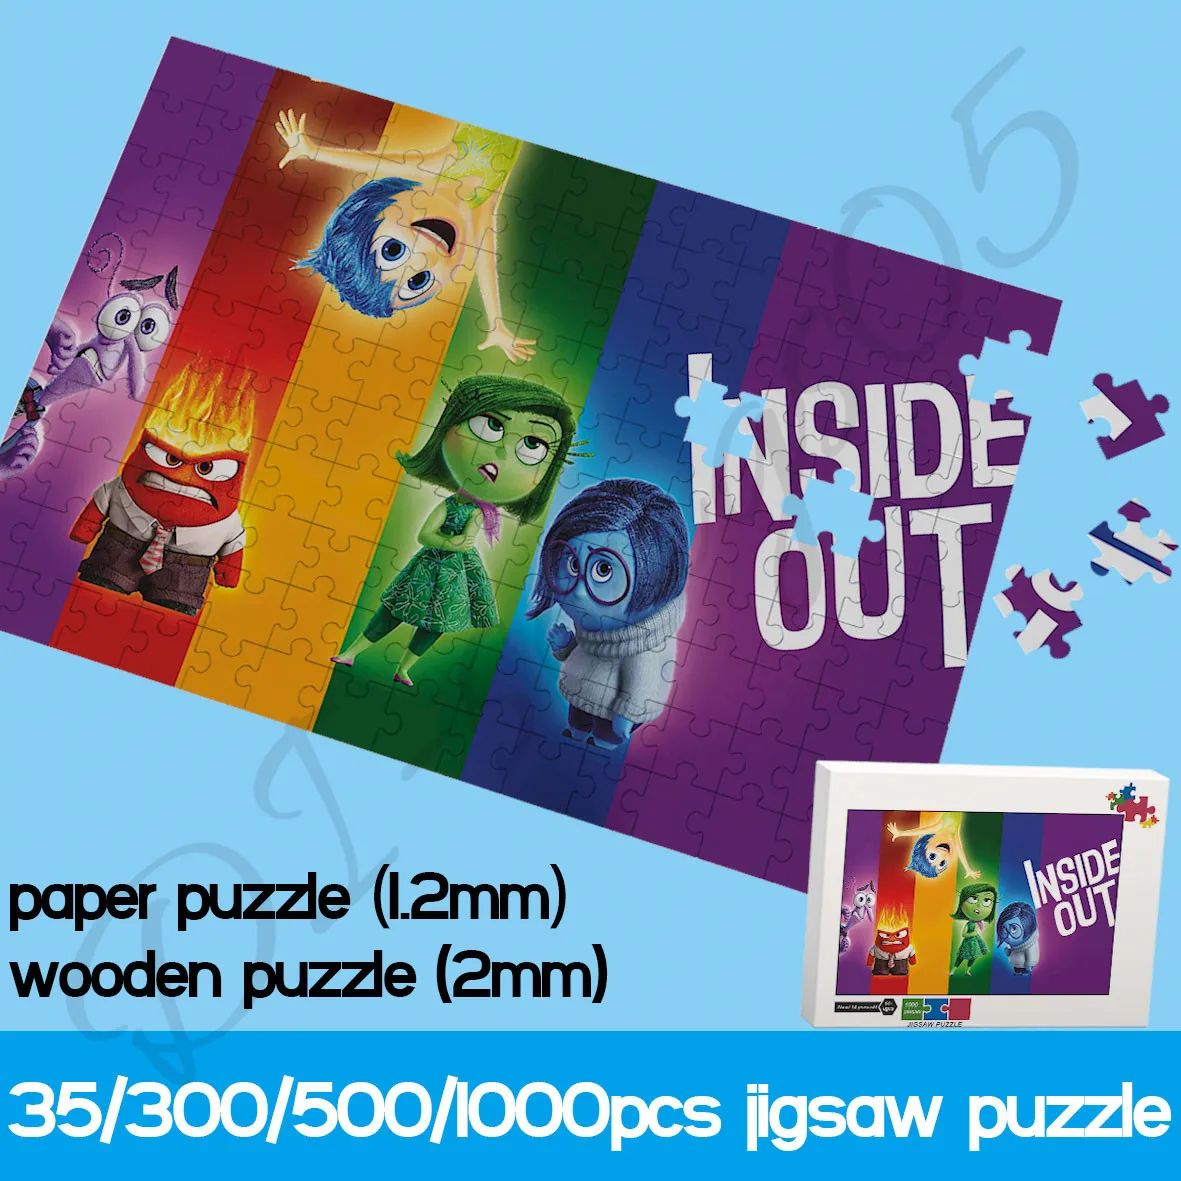 Inside Out 1000 Piece Puzzles for Kids Disney 3D Animated Movie Paper and Wooden Jigsaw Puzzles Decompress Recreational Toys